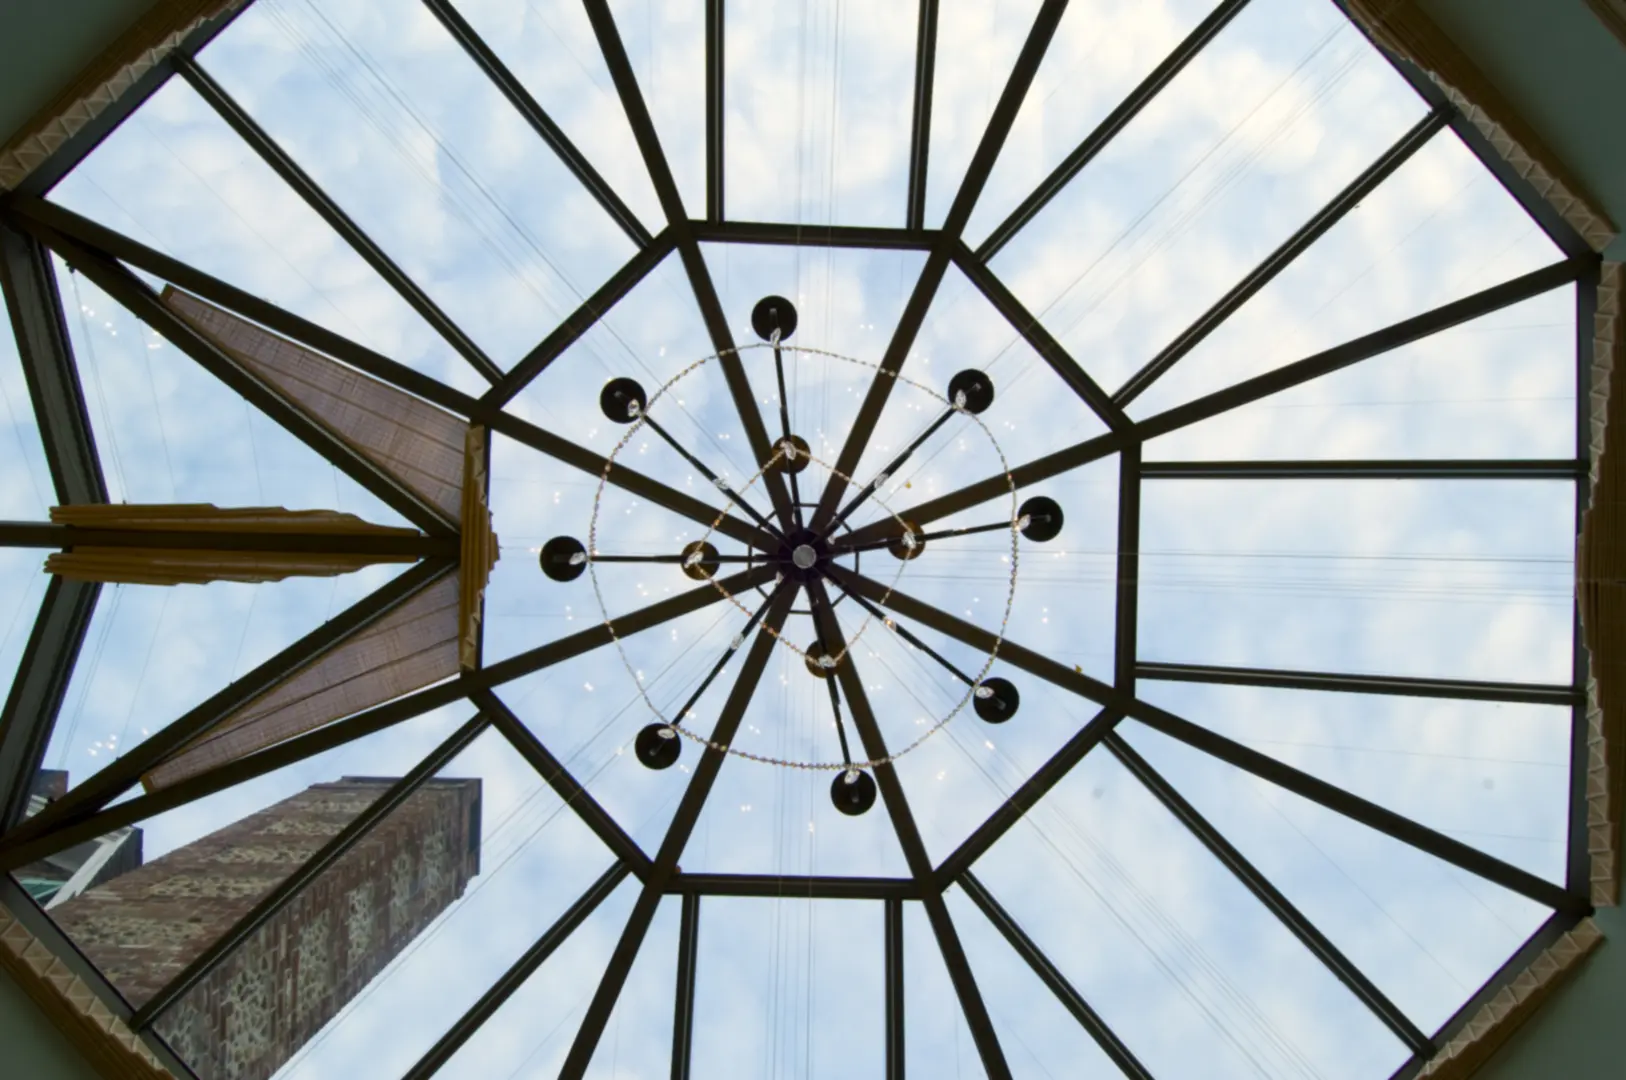 A view of the top of a building from below.